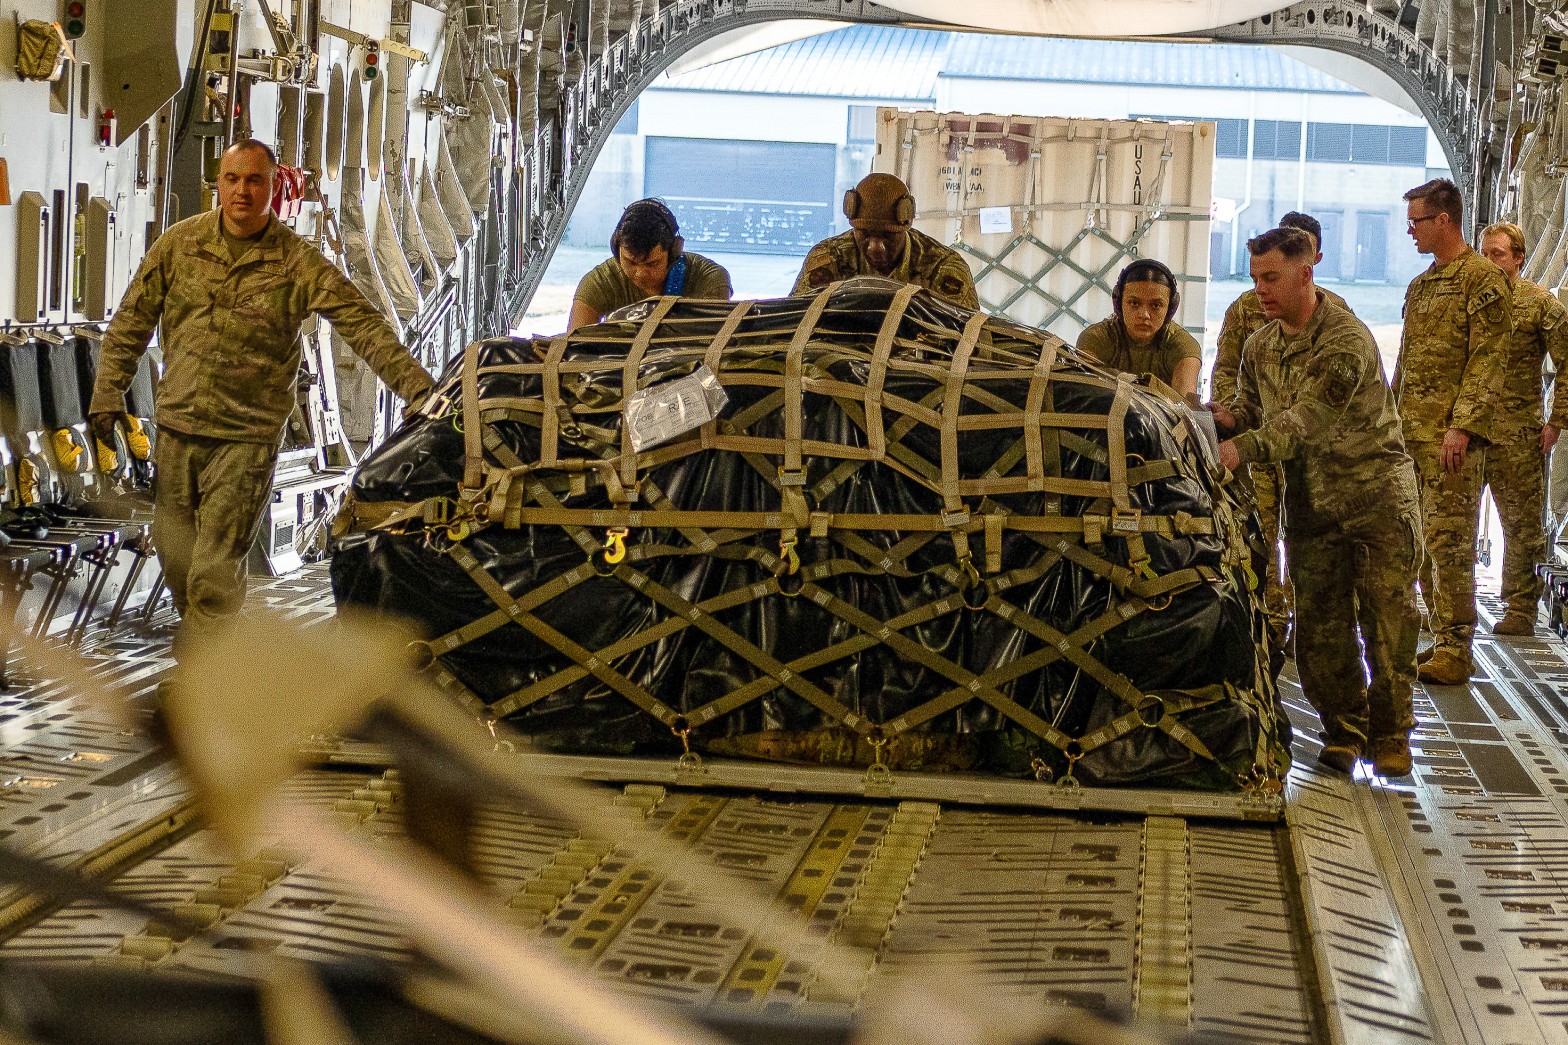 Source: https://www.defense.gov/News/News-Stories/Article/Article/2955960/us-provided-more-than-1-billion-in-security-assistance-to-ukraine-in-past-year/Air Force airmen load cargo on a C-17 bound for Poland at Pope Army Airfield, N.C., Feb. 10, 2022.